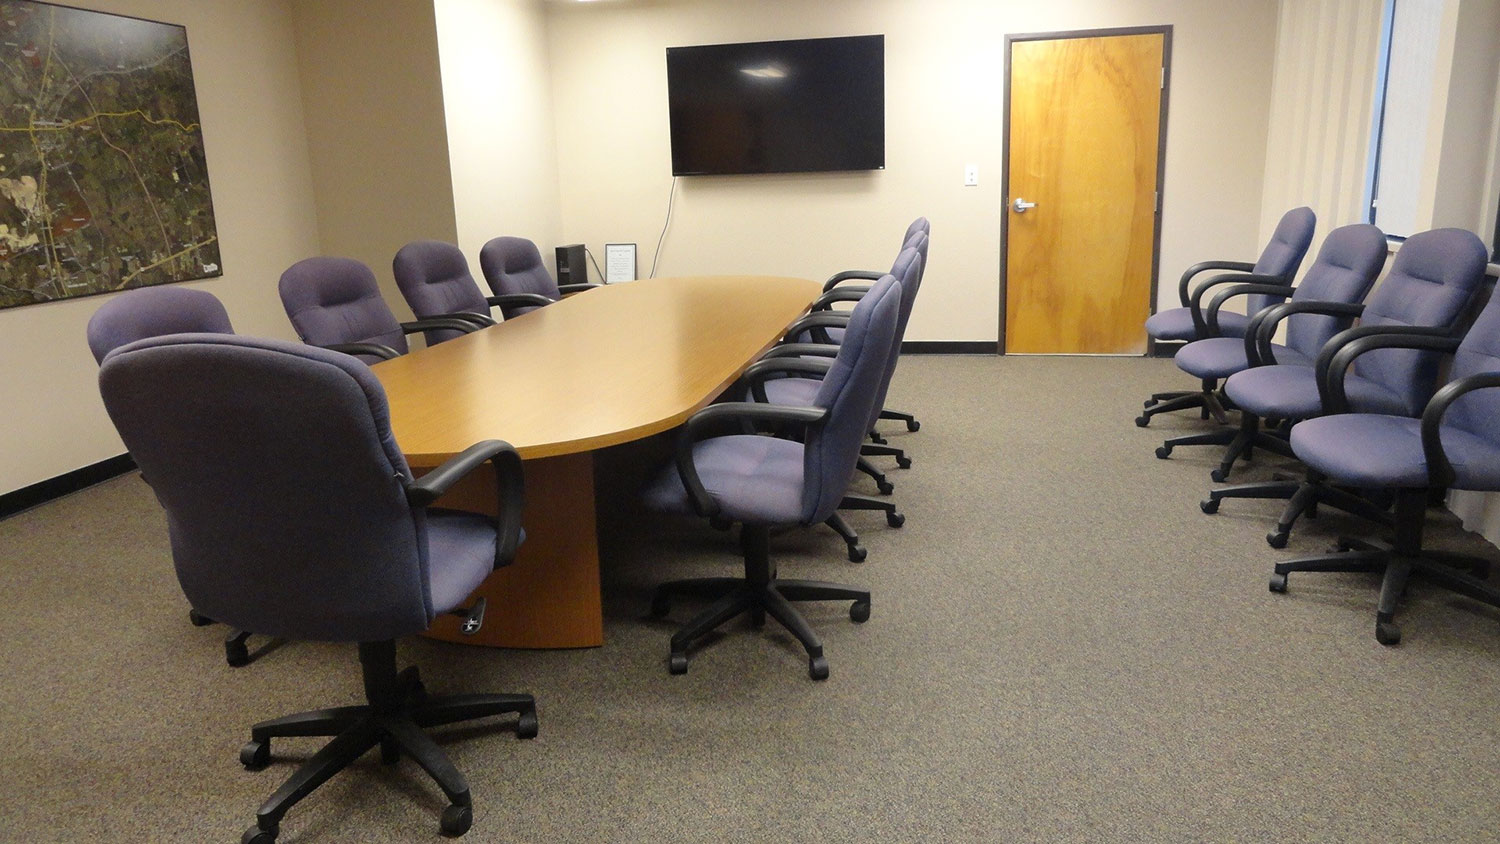 Conference room with conference style table and chairs